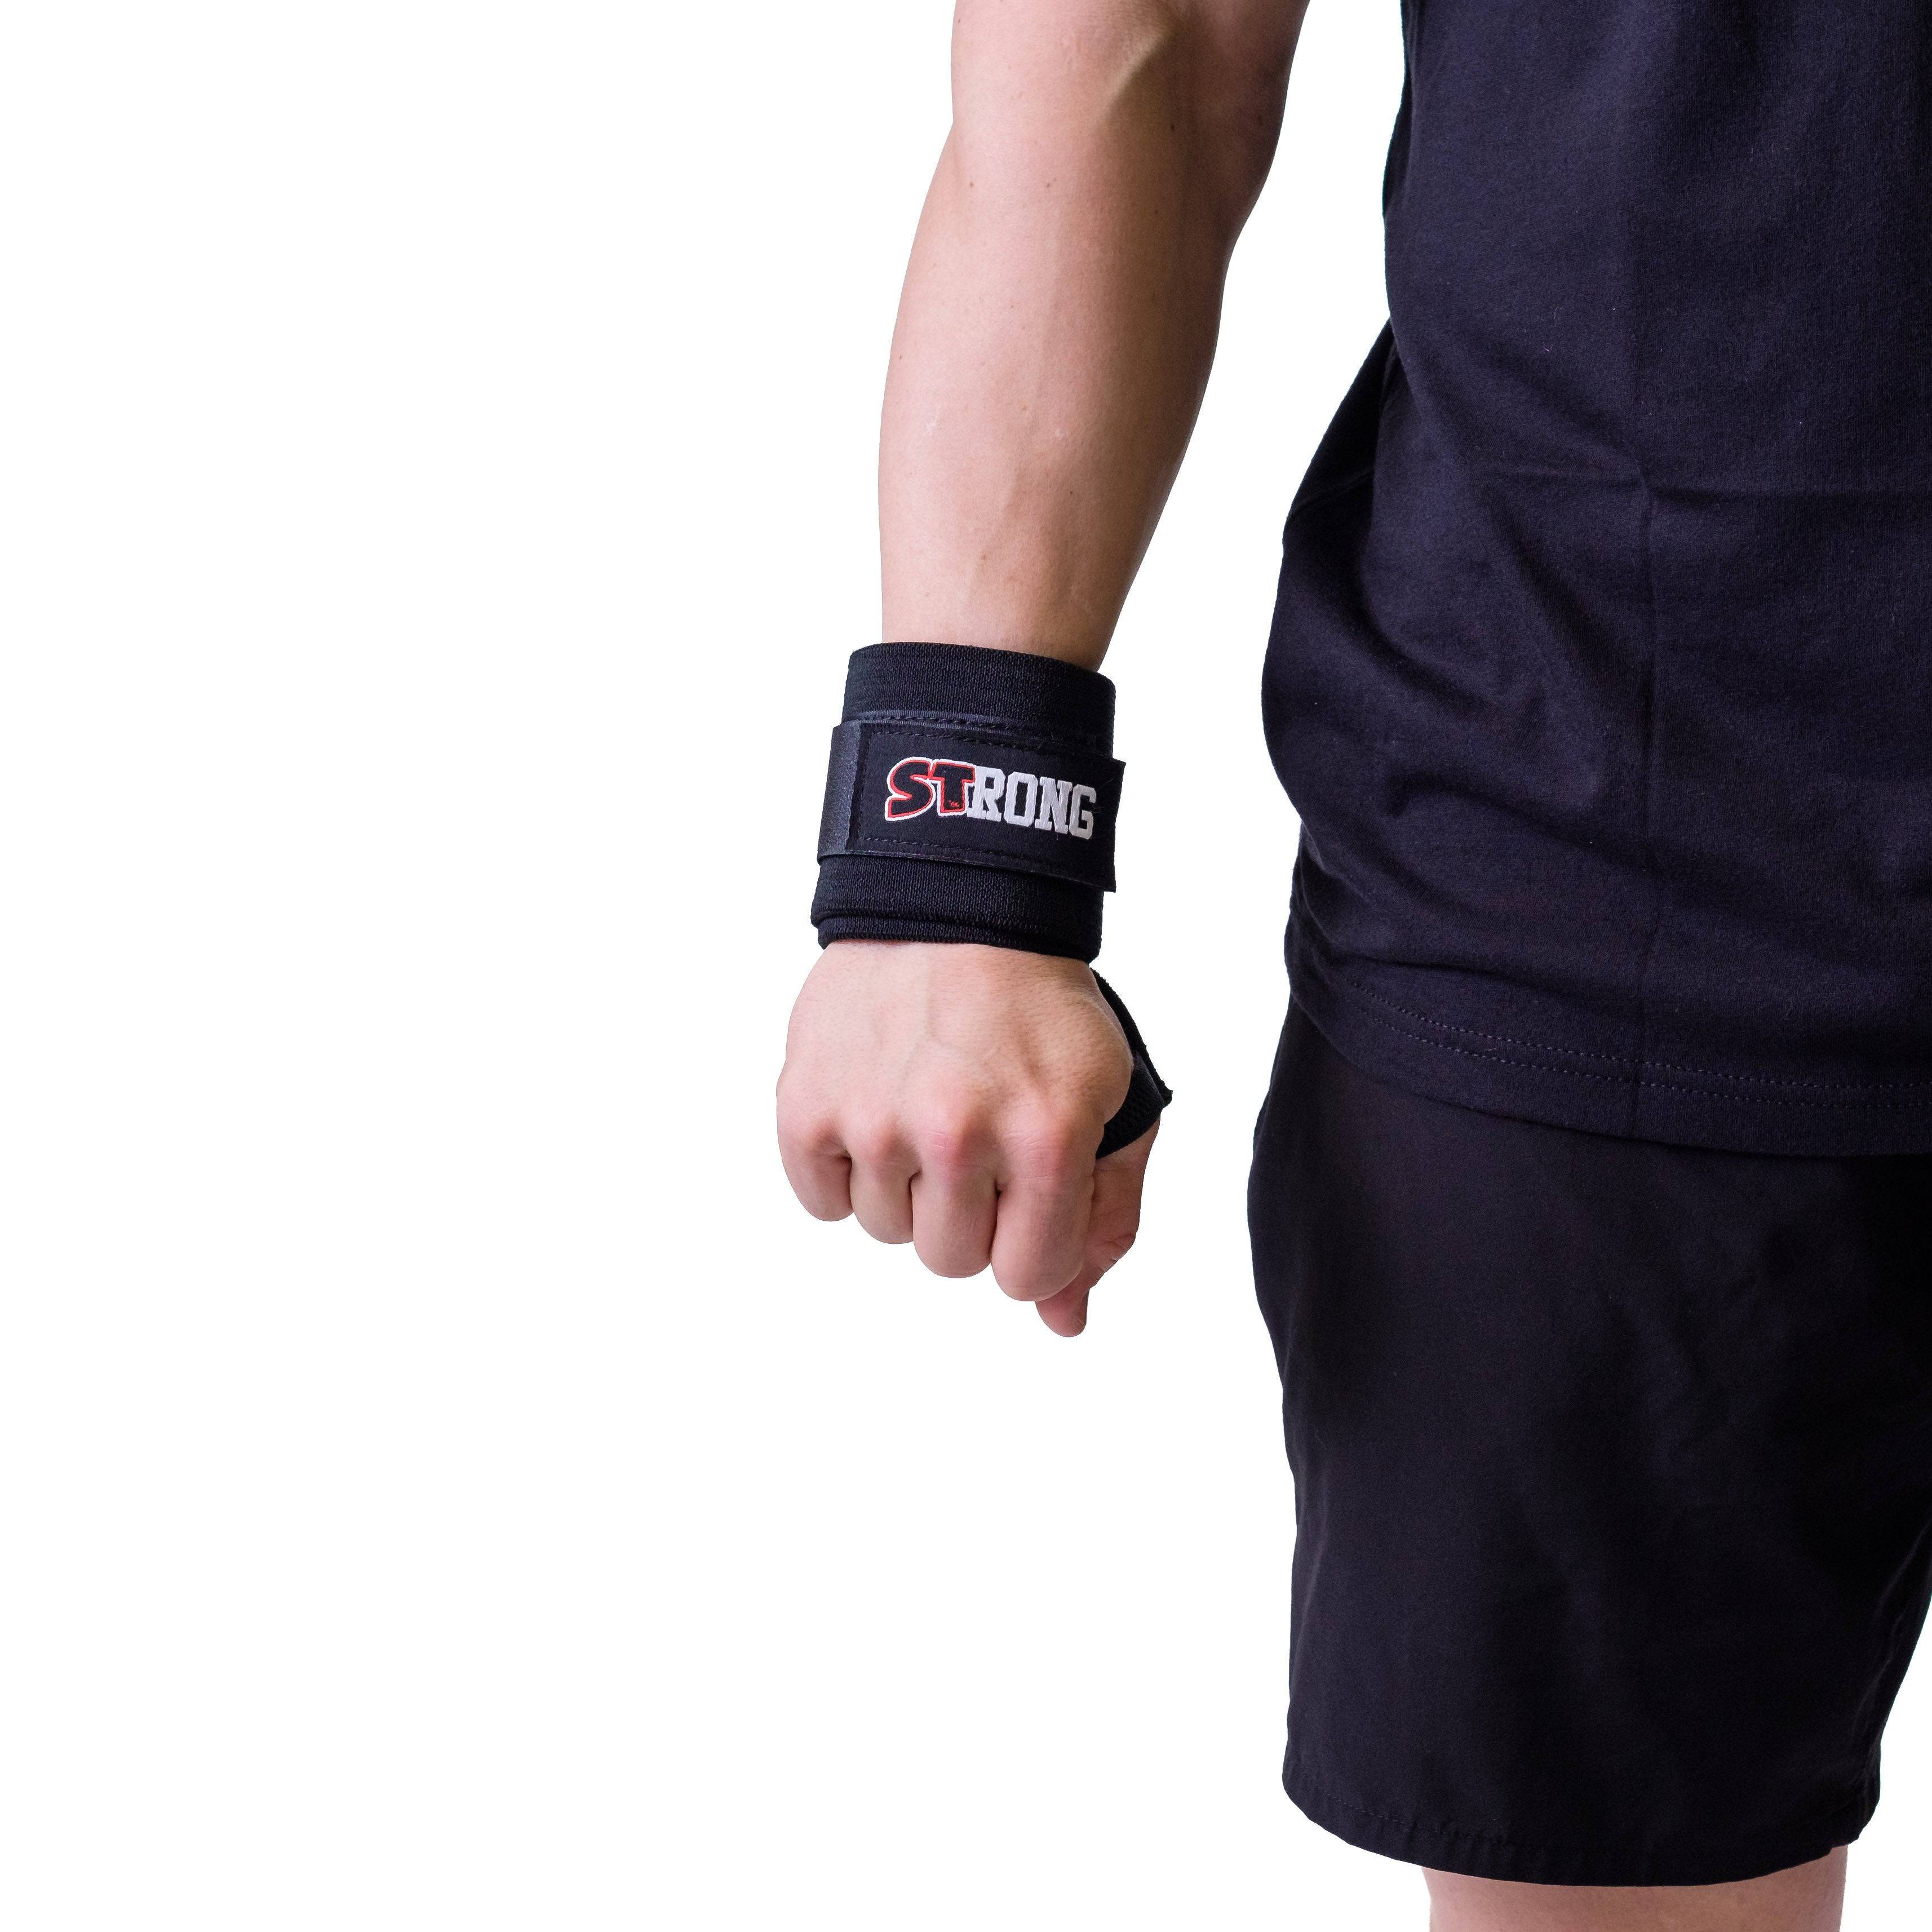 Sling Shot | STrong Wrist Wraps - Black - XTC Fitness - Exercise Equipment Superstore - Canada - Wrist Wraps